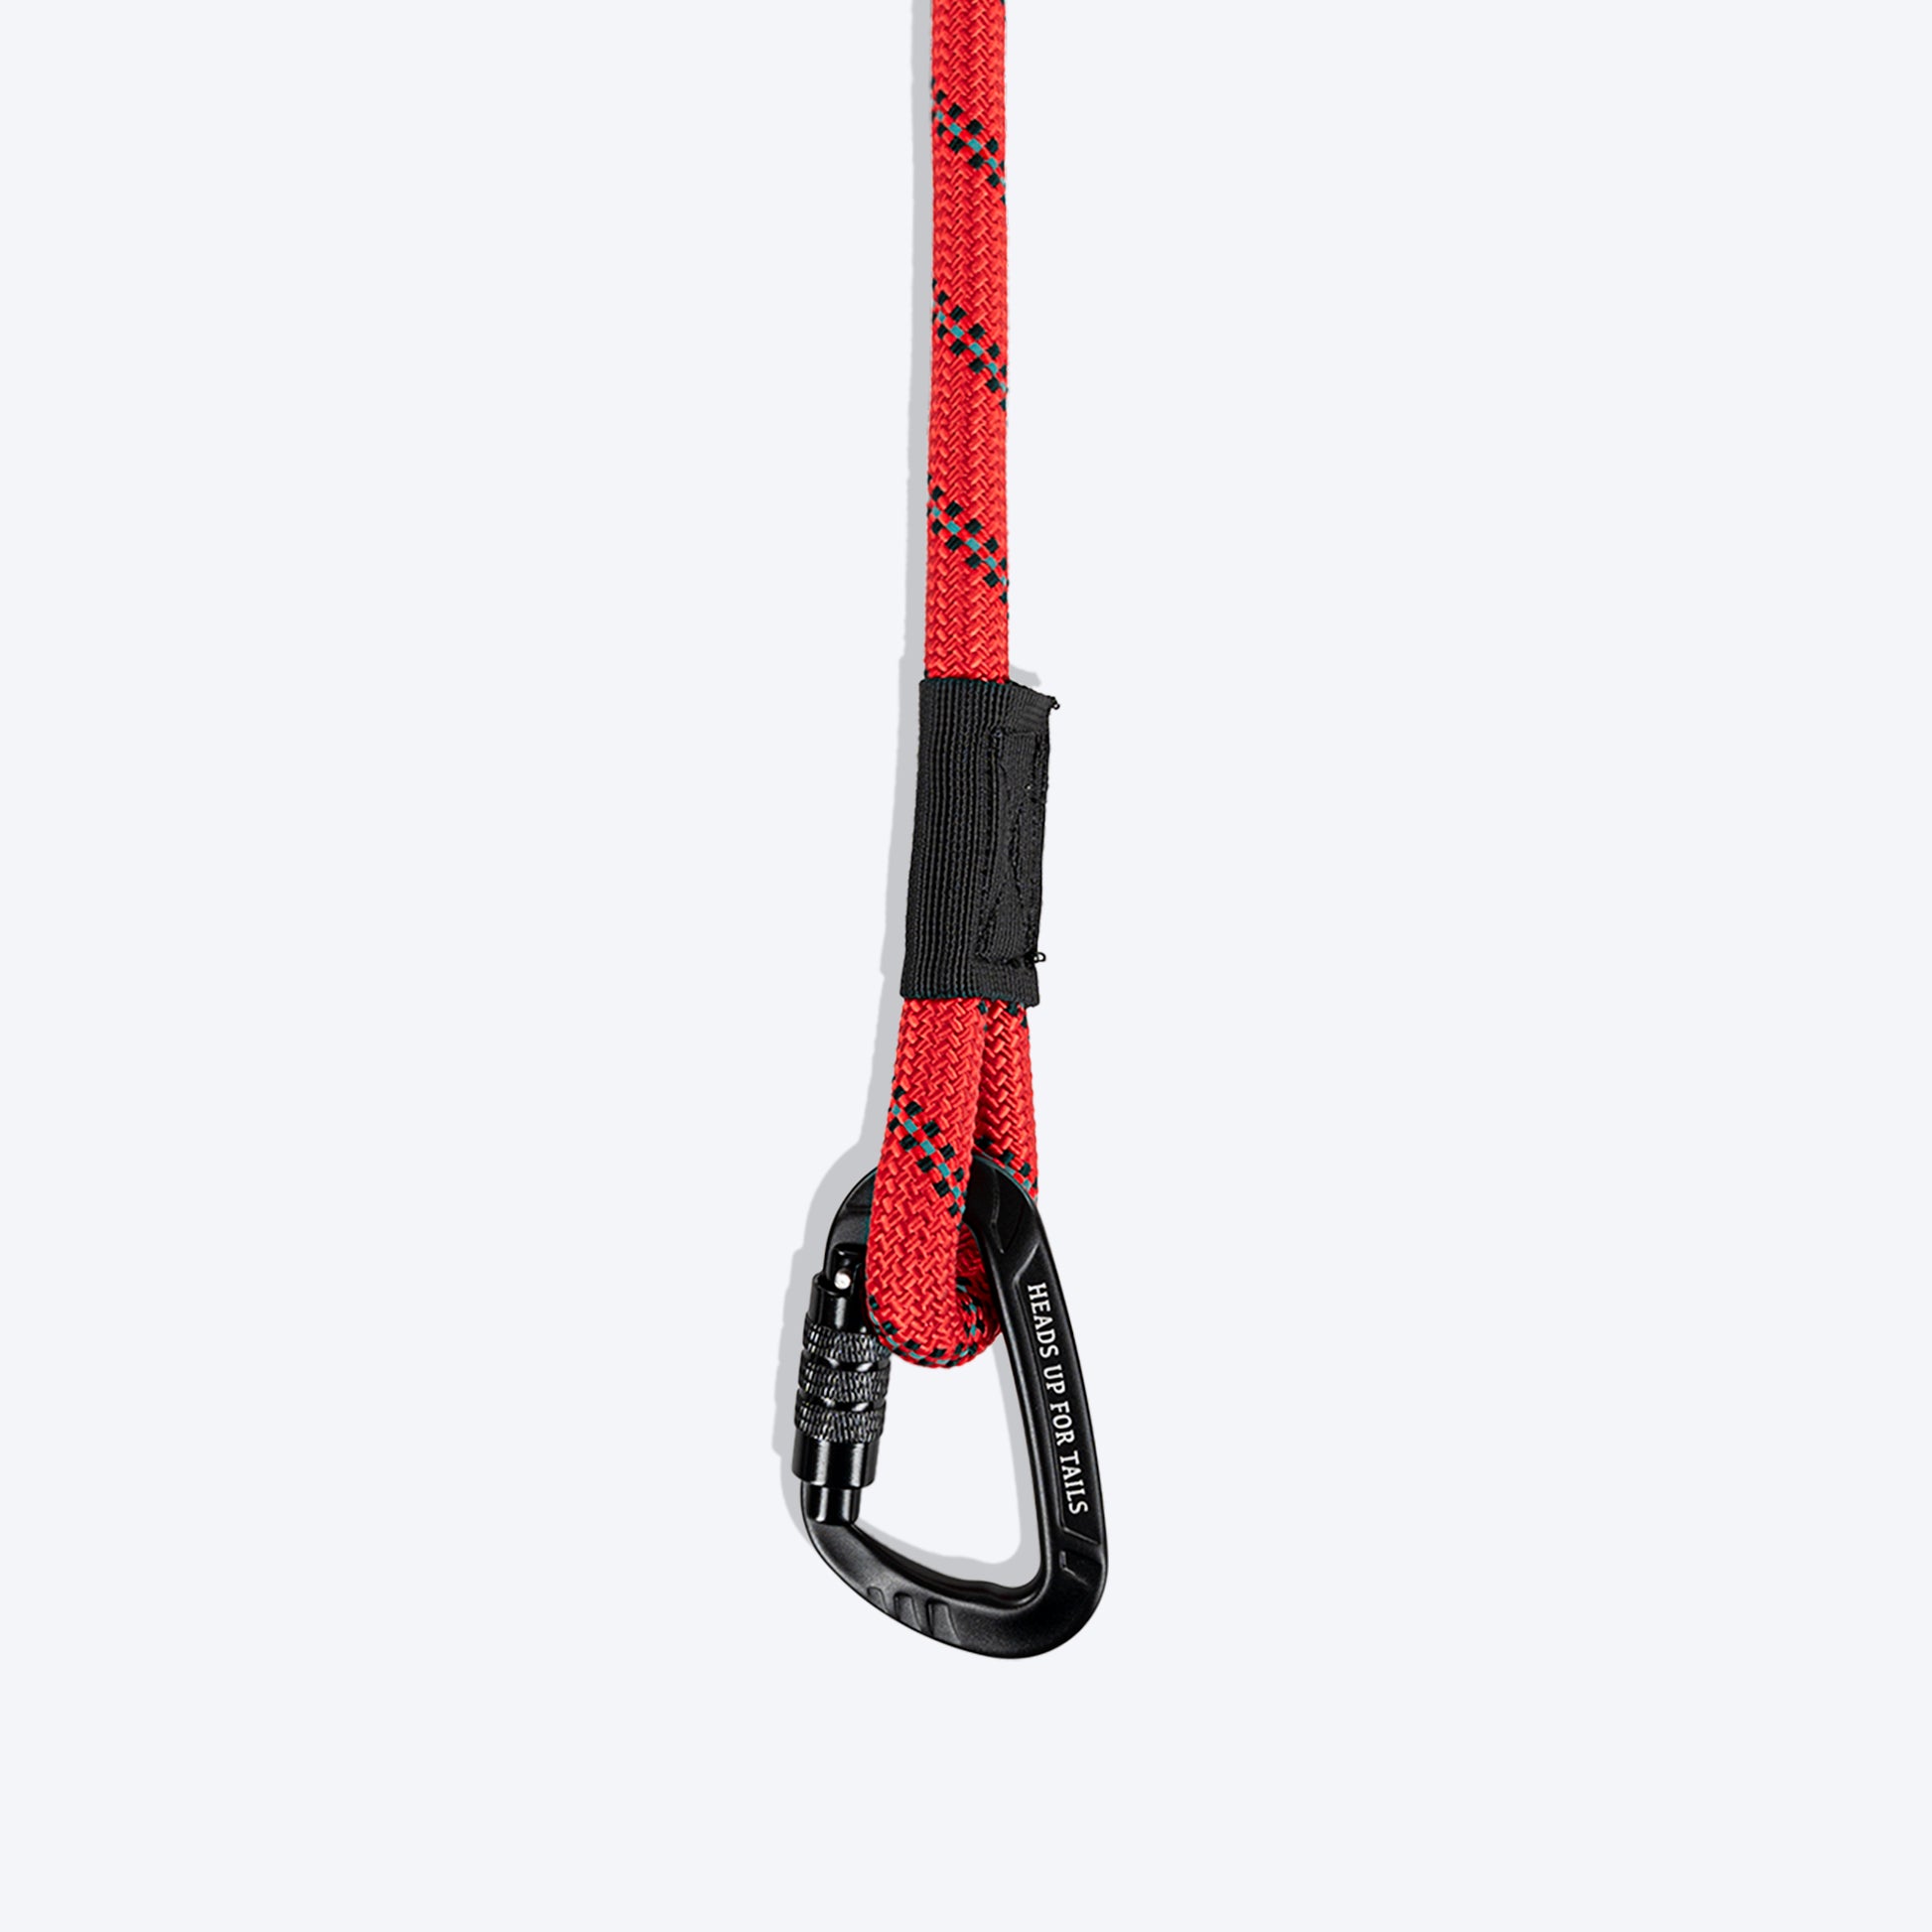 HUFT Rope Leash With Carabiner For Dog - Red - 1.2 m - Heads Up For Tails